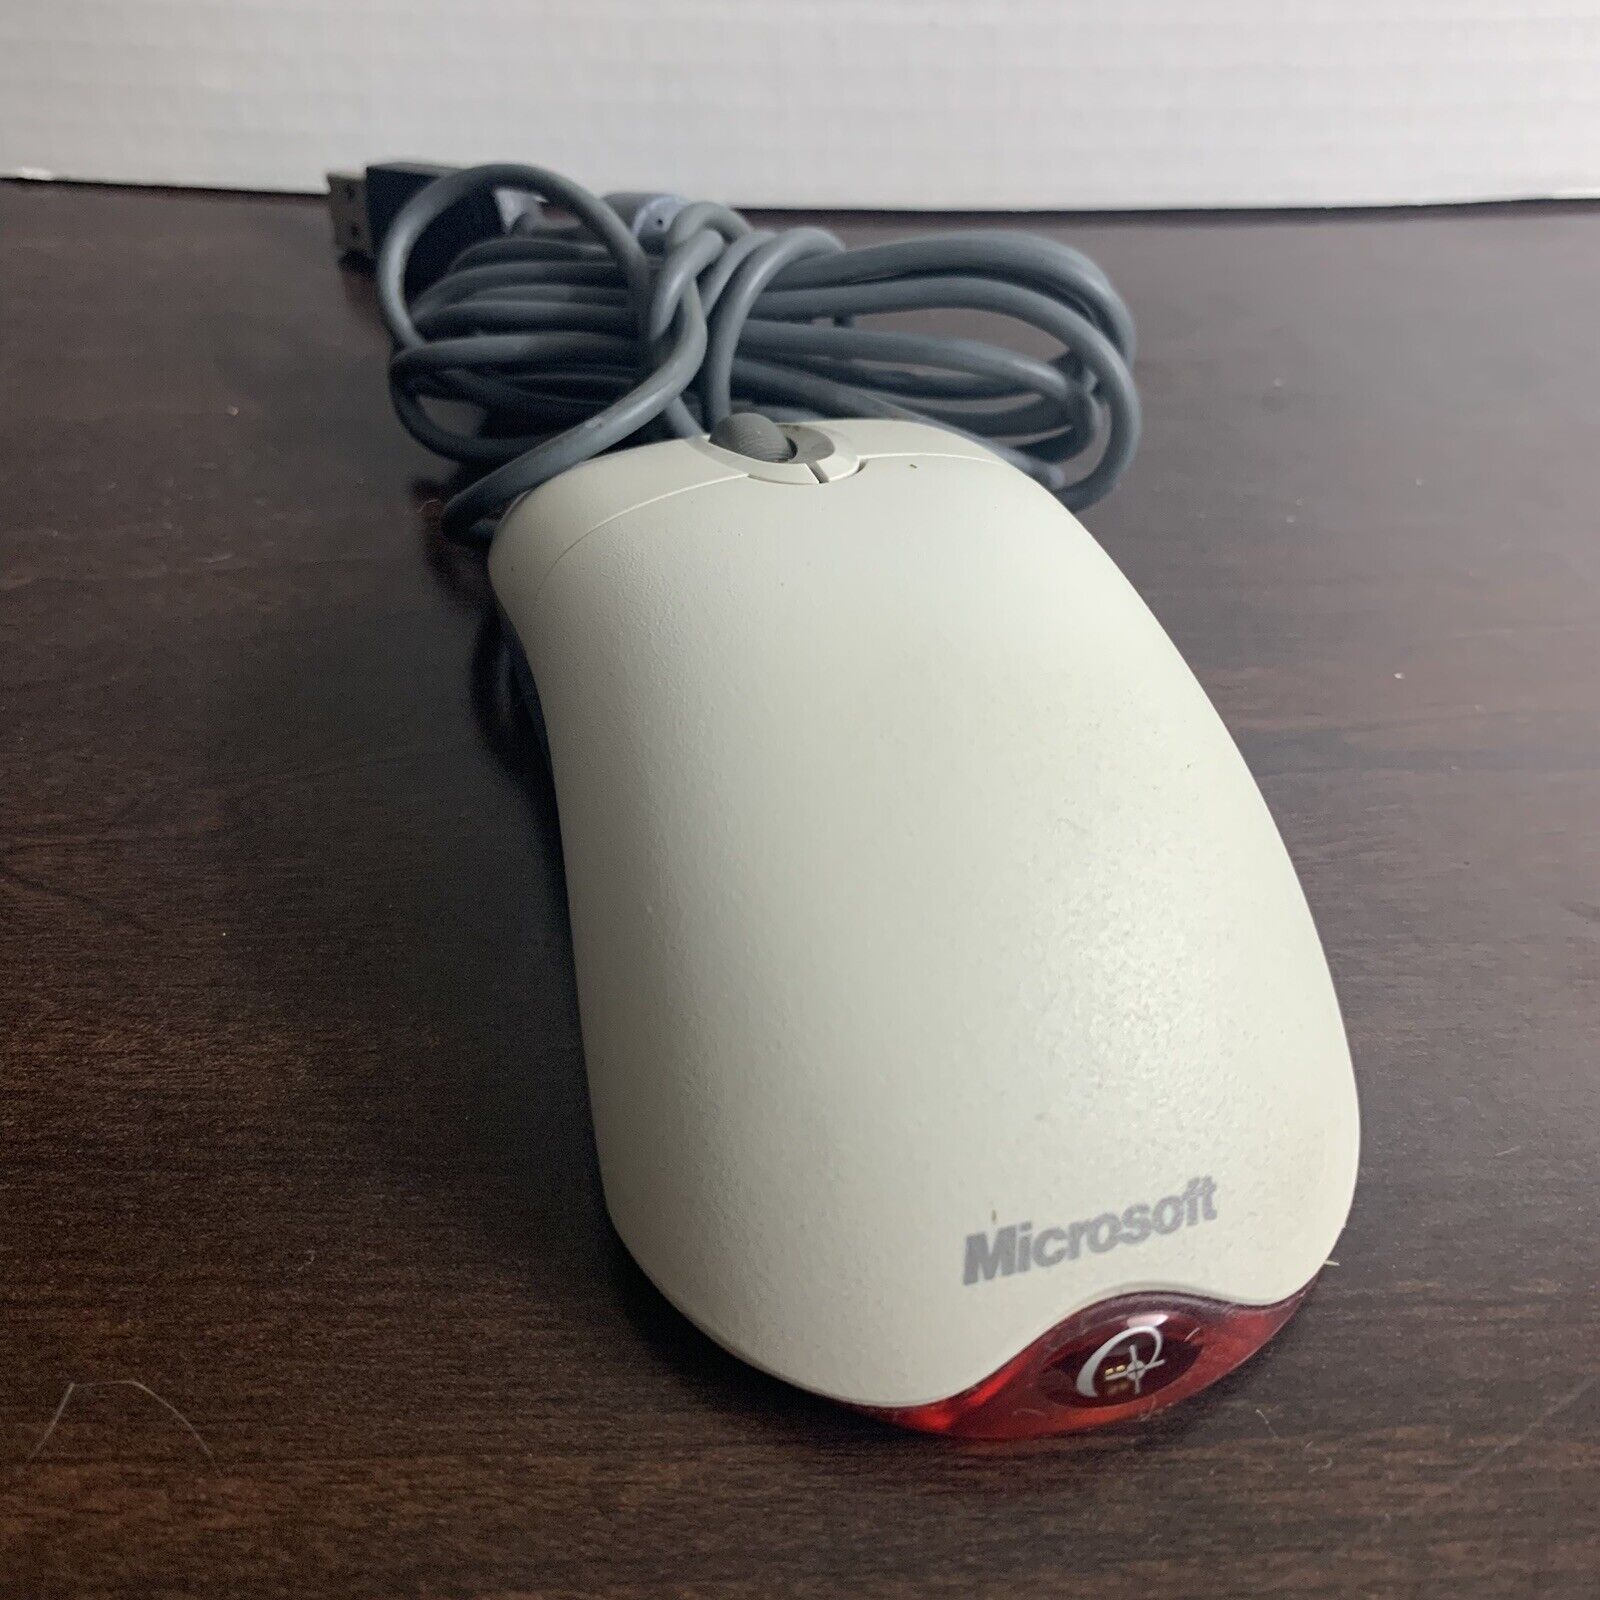 Vintage Microsoft intellimouse Optical USB Wheel Mouse 5-Button - CLEAN & TESTED